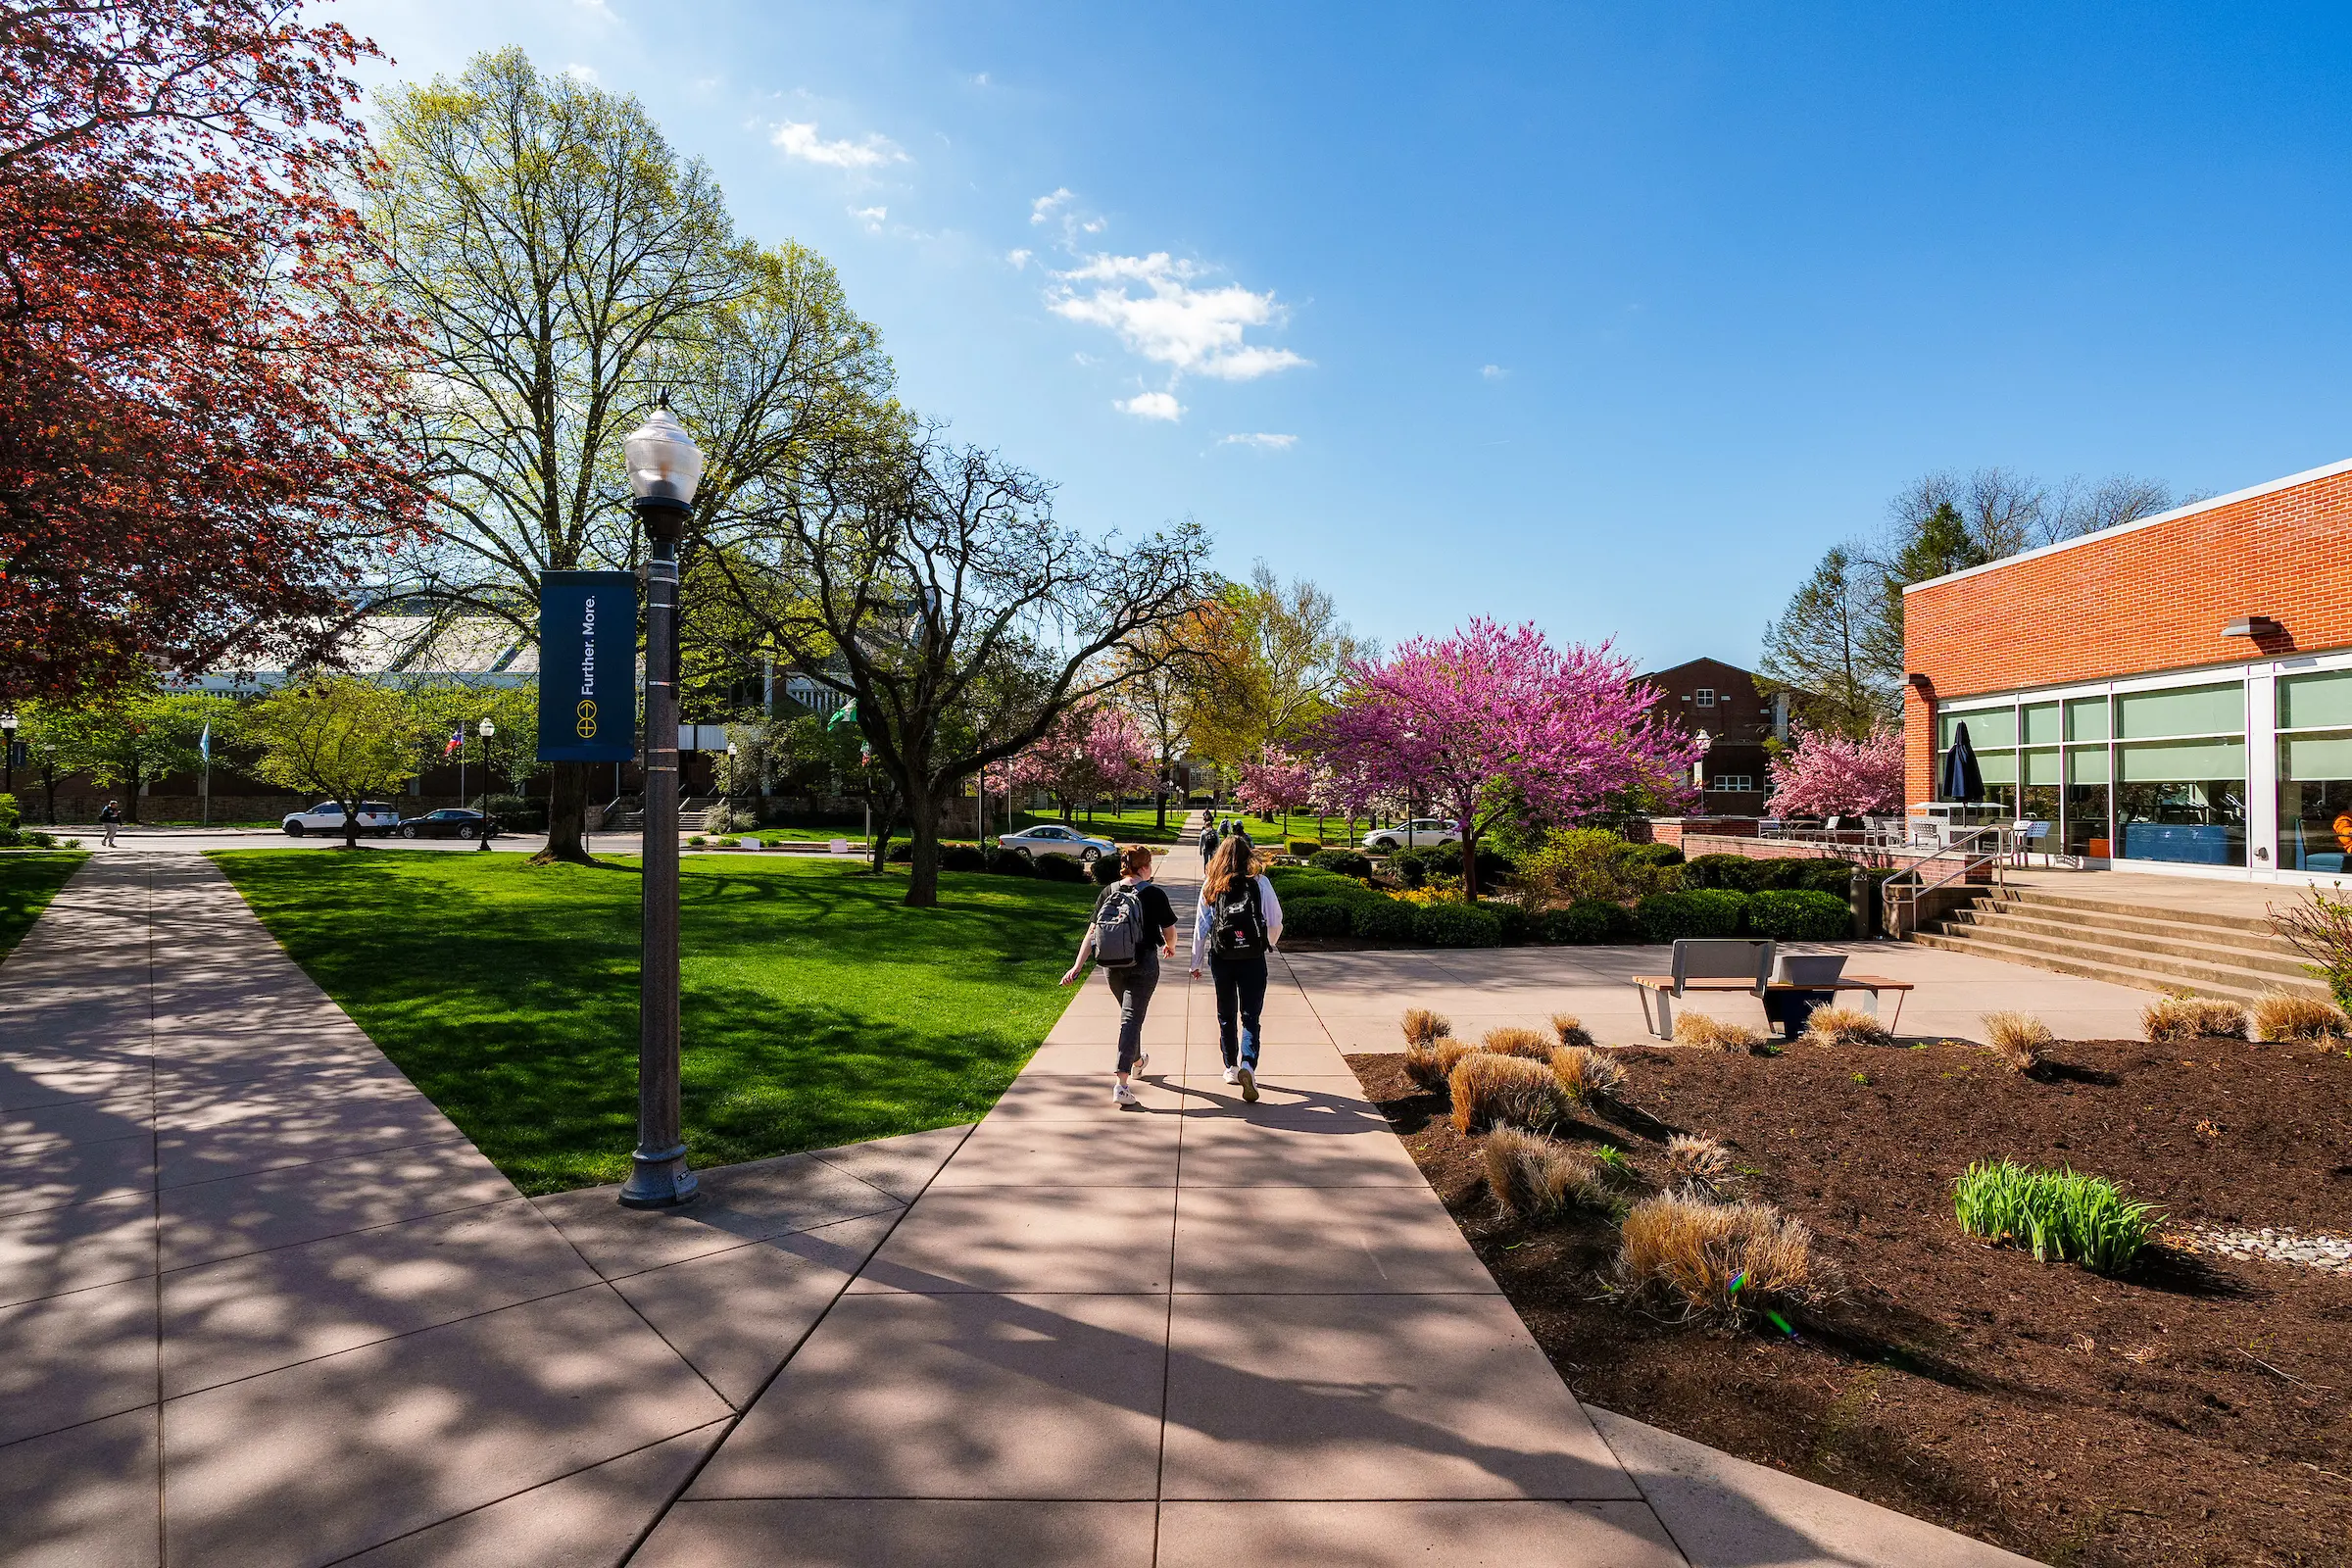 Students walk on campus with spring trees in bloom